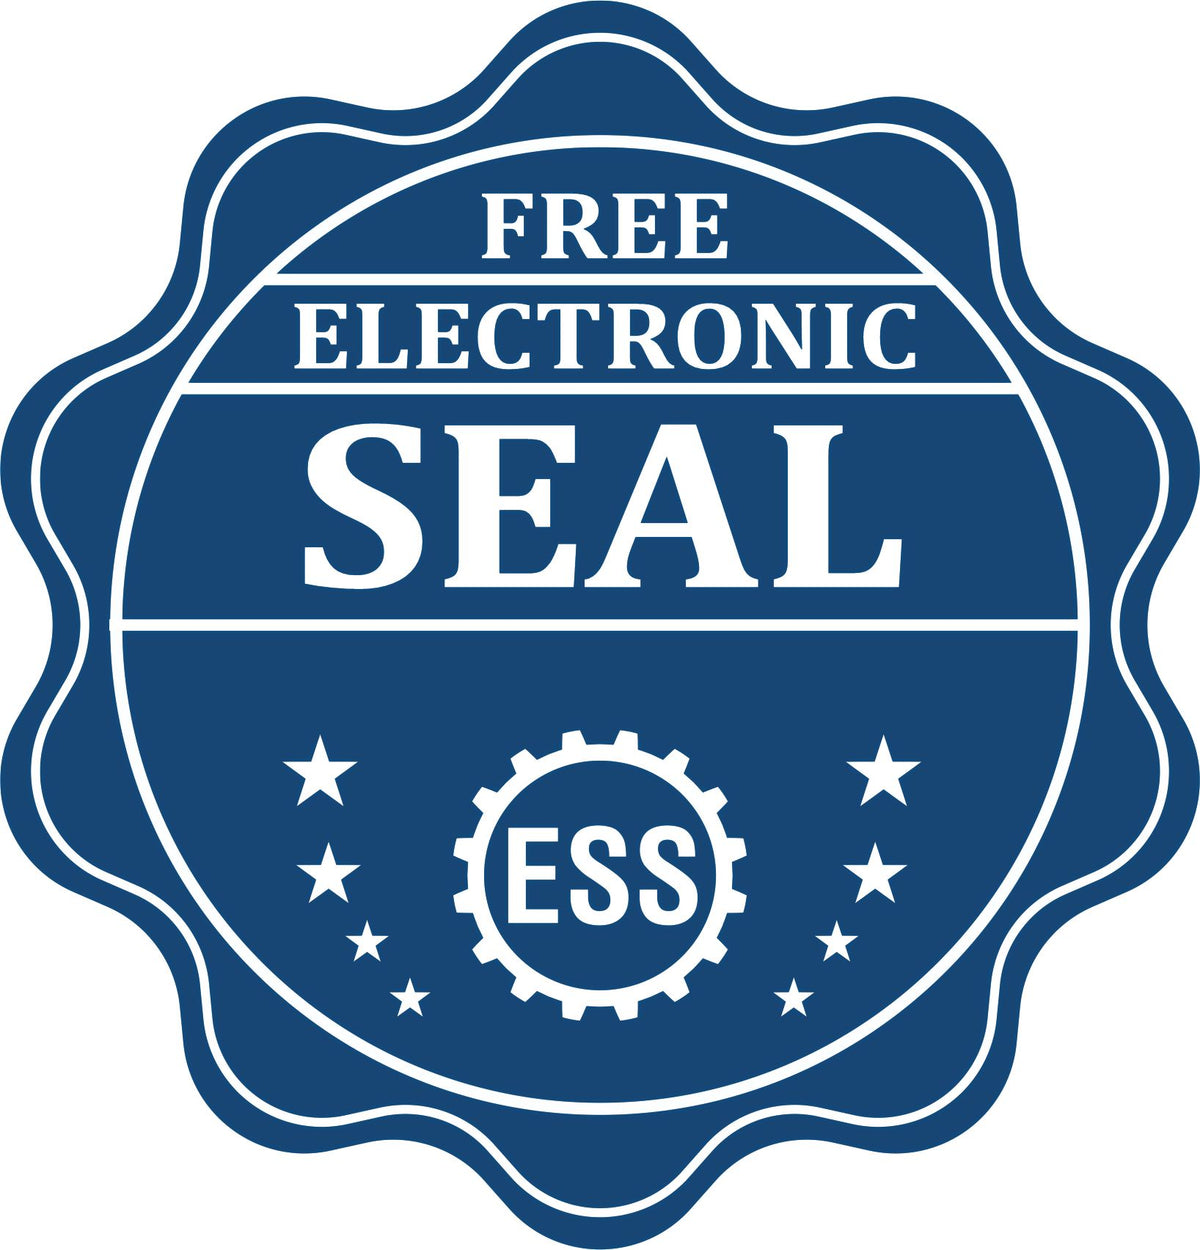 A badge showing a free electronic seal for the State of Wyoming Long Reach Architectural Embossing Seal with stars and the ESS gear on the emblem.